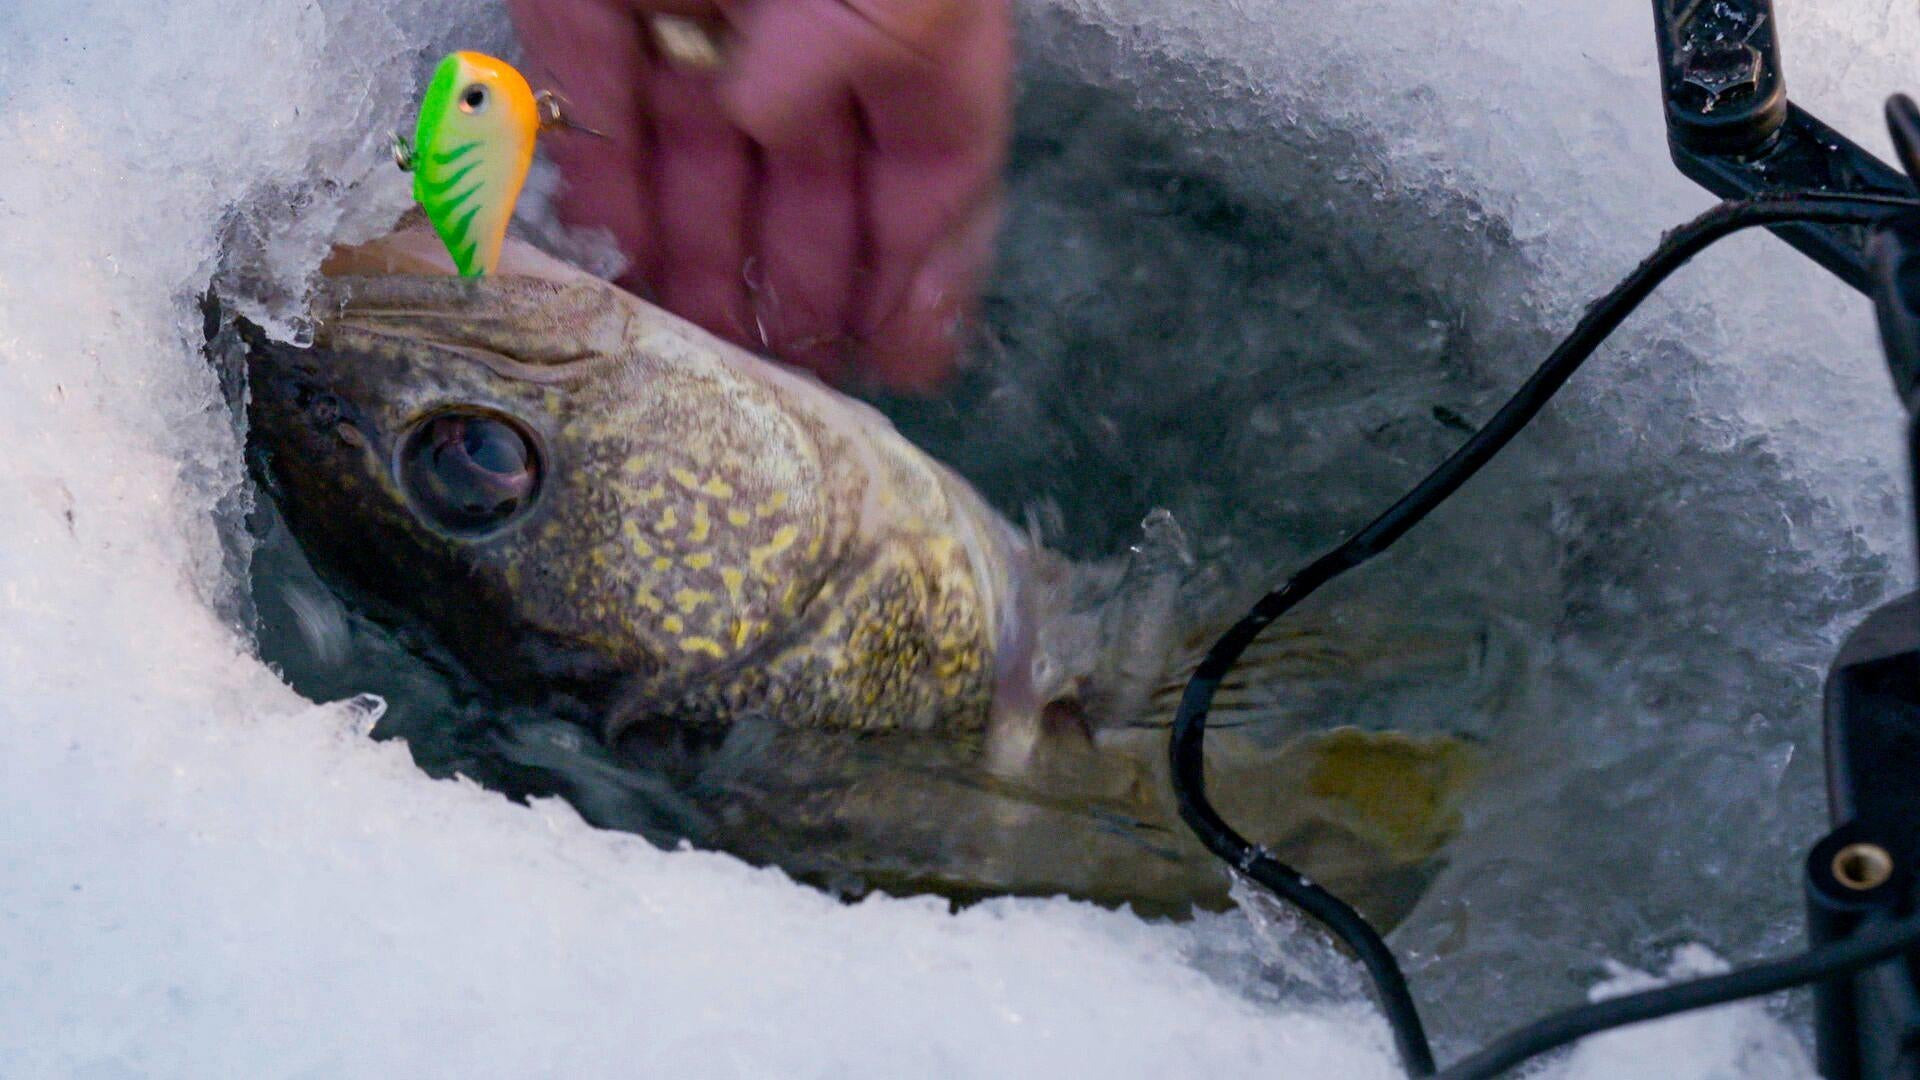 Jerk Bait Tactics for Spring Walleye With Tony Roach - Virtual Angling